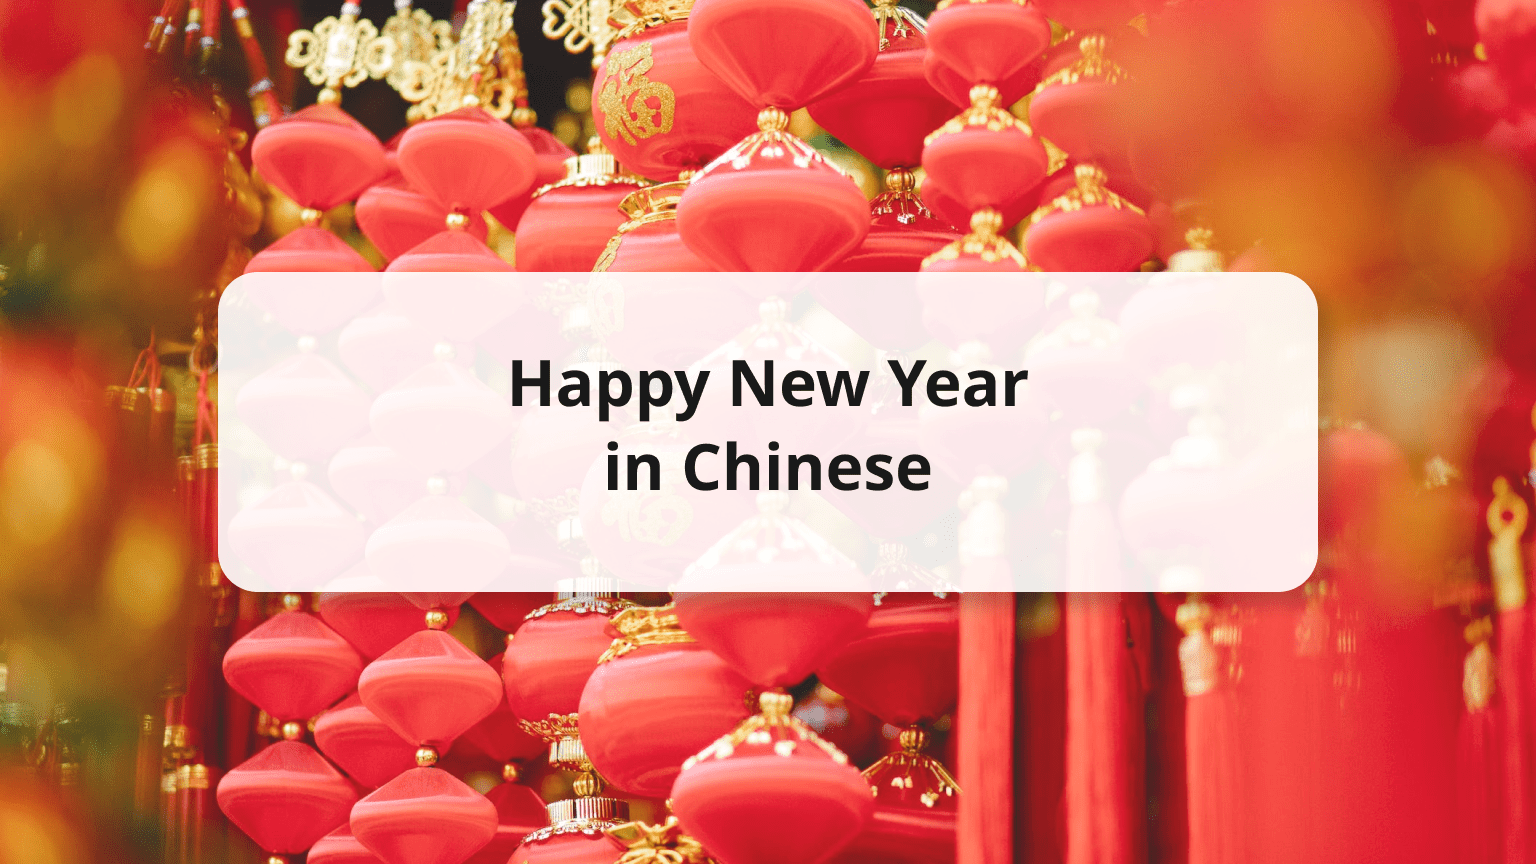 20+ Ways to Say Happy New Year in Chinese: Greetings & Wishes